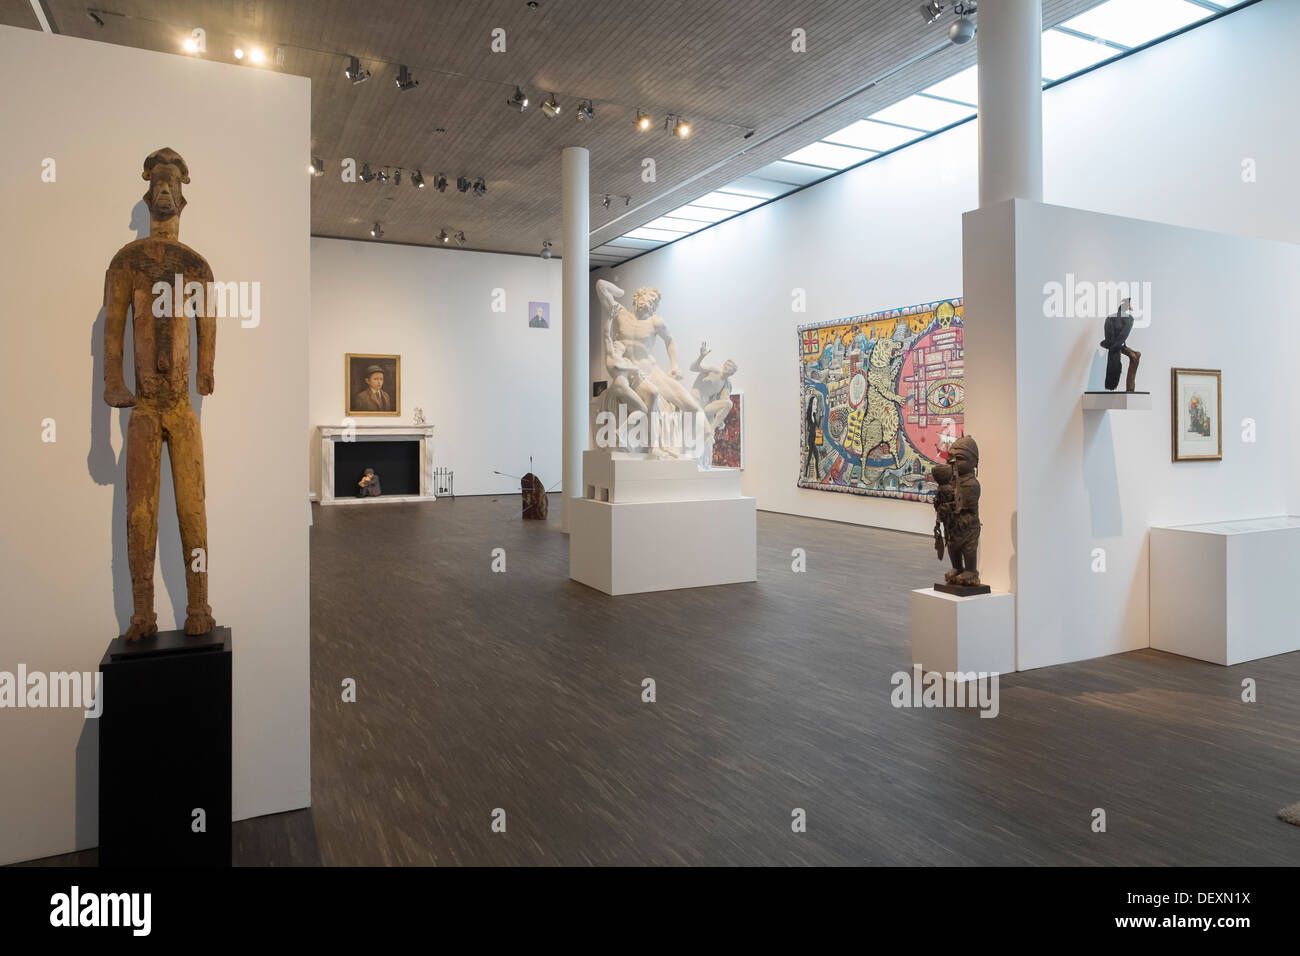 exhibit at me Collectors room art museum featuring the Olbricht Foundation art collection in Berlin Germany Stock Photo